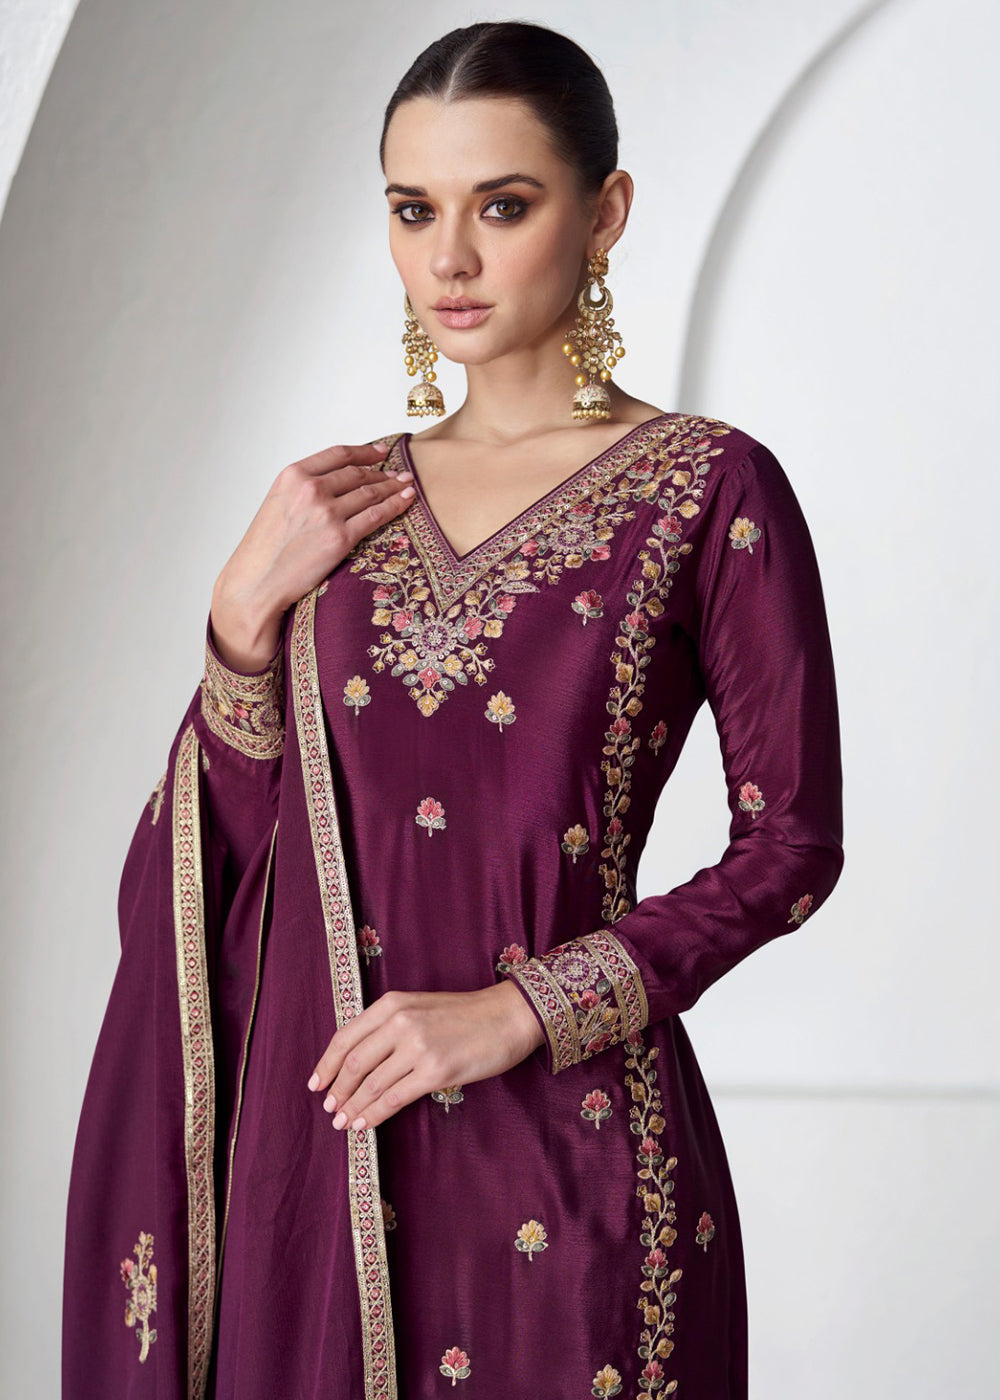 Buy Now Palazzo Style Premium Chinnon Silk Wine Festive Suit Online in USA, UK, Canada, Germany, Australia & Worldwide at Empress Clothing